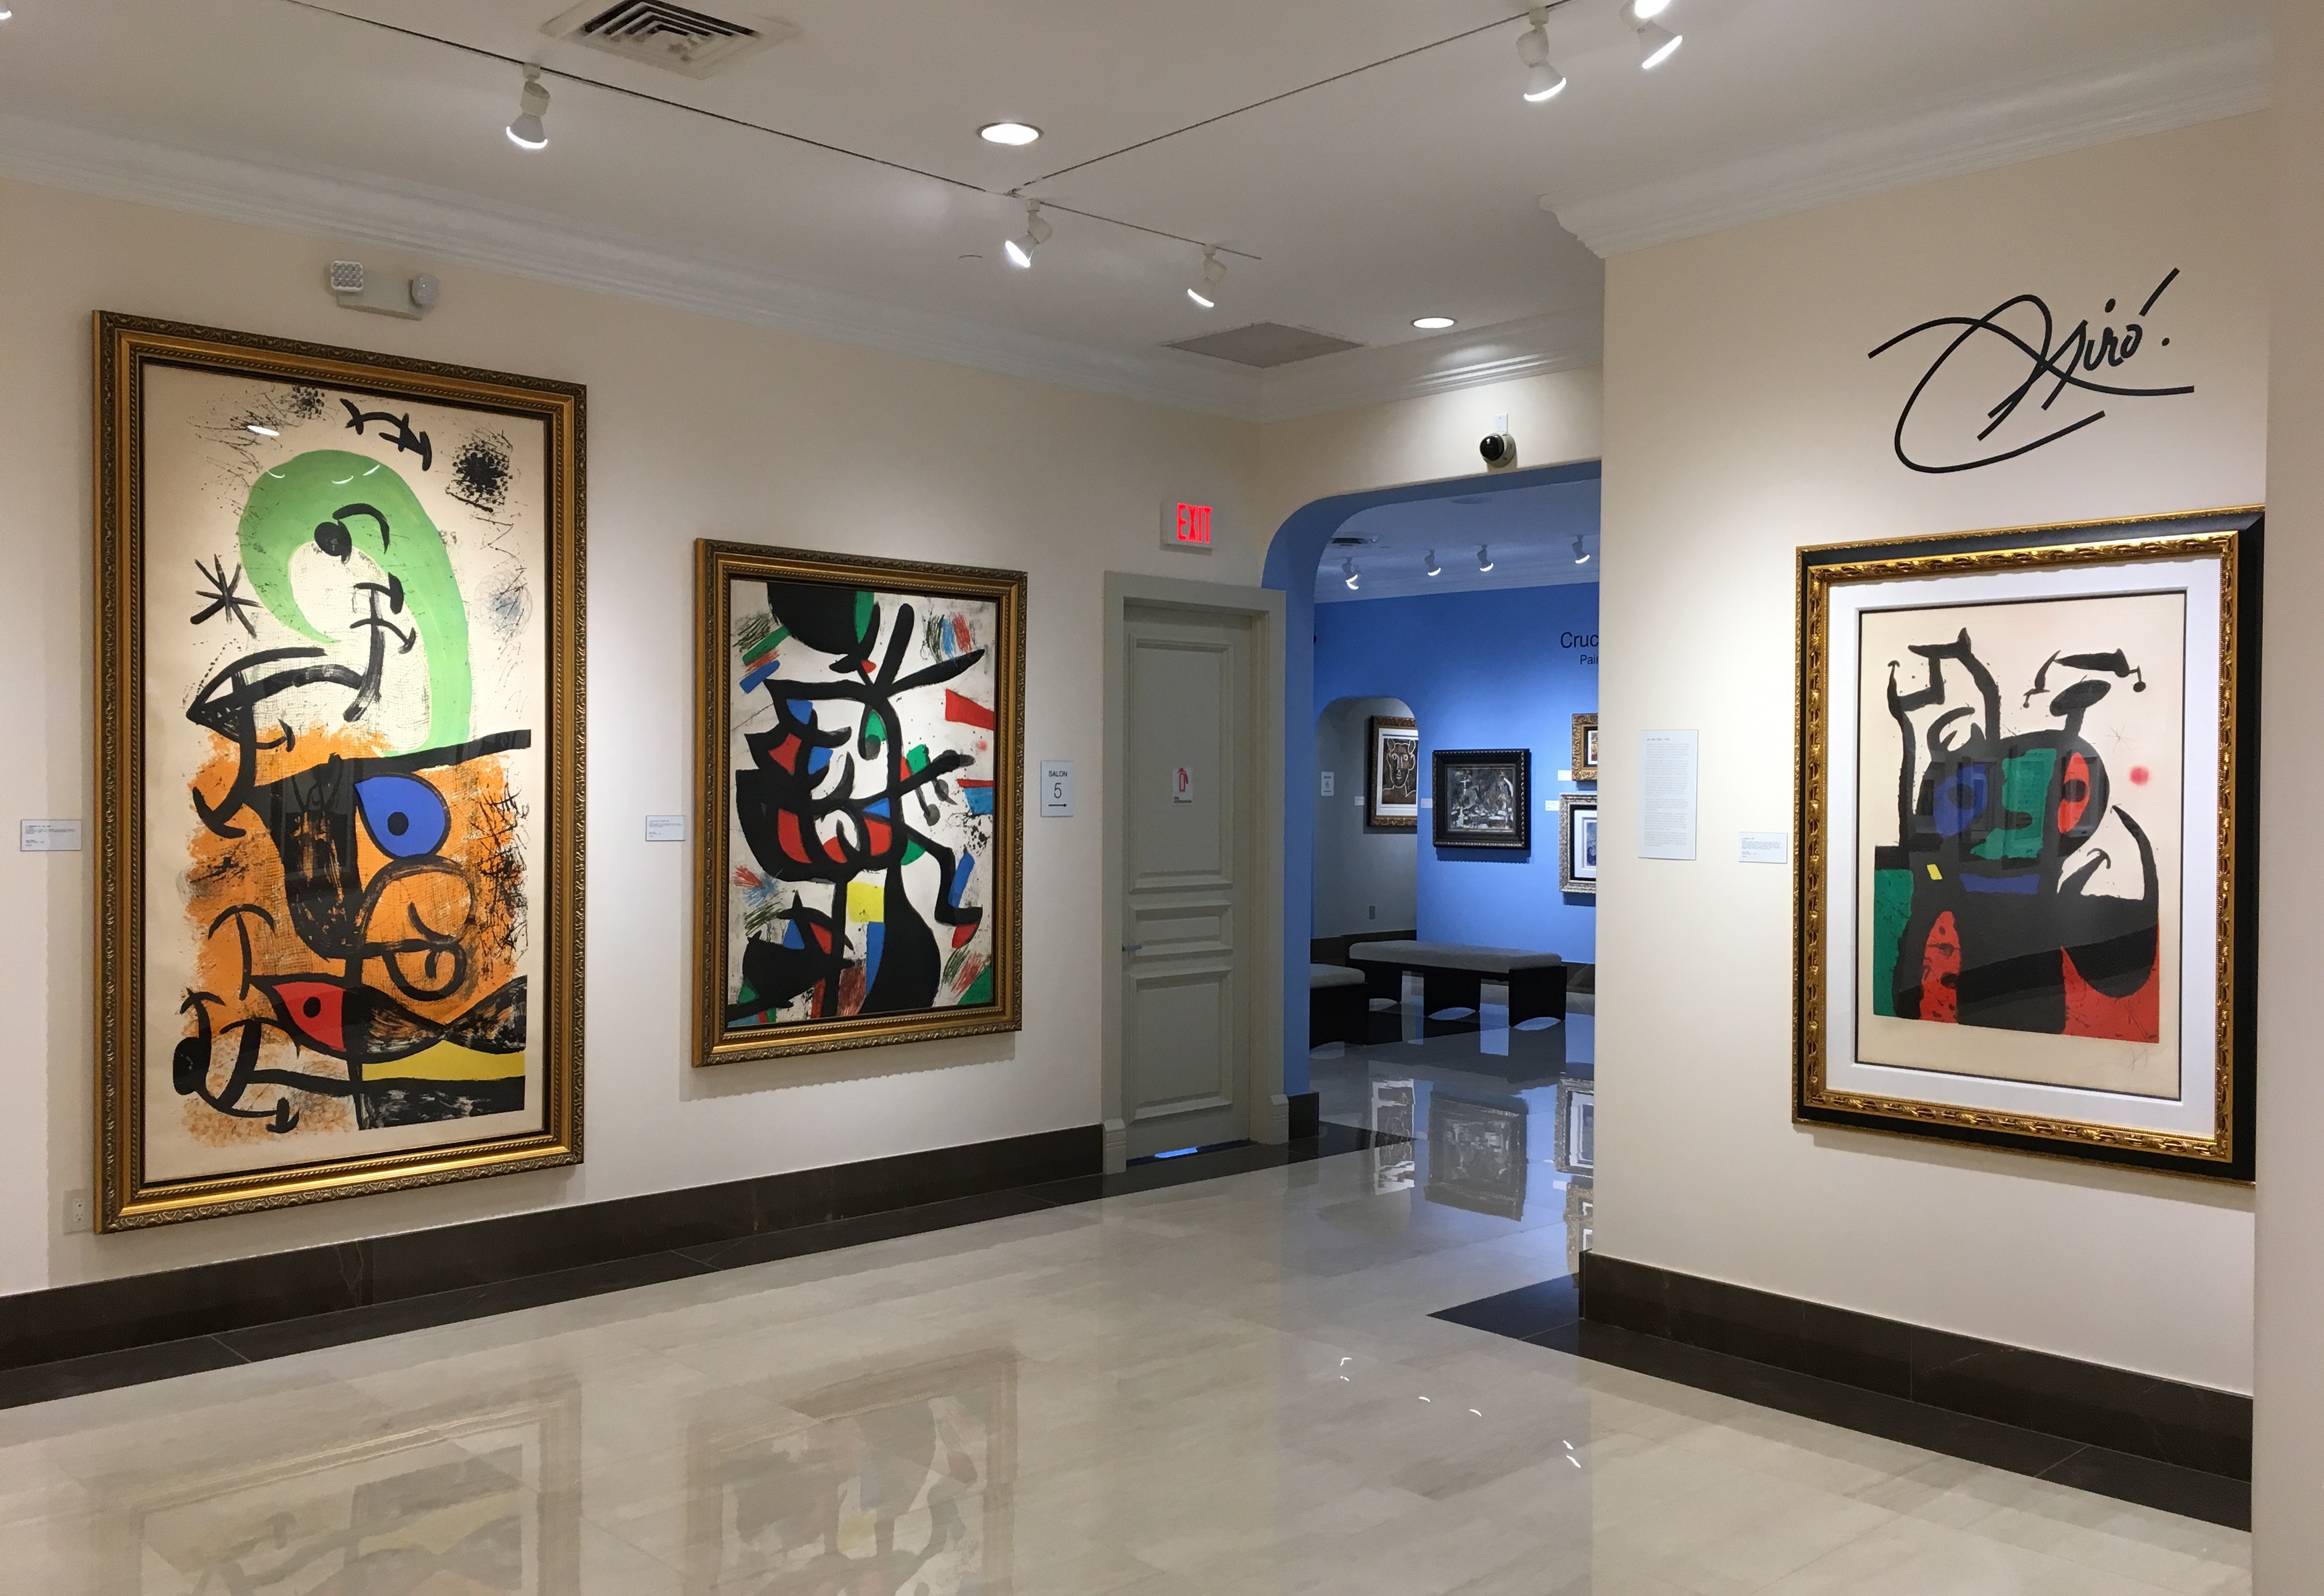 The Joan Miró Gallery at Park West Museum